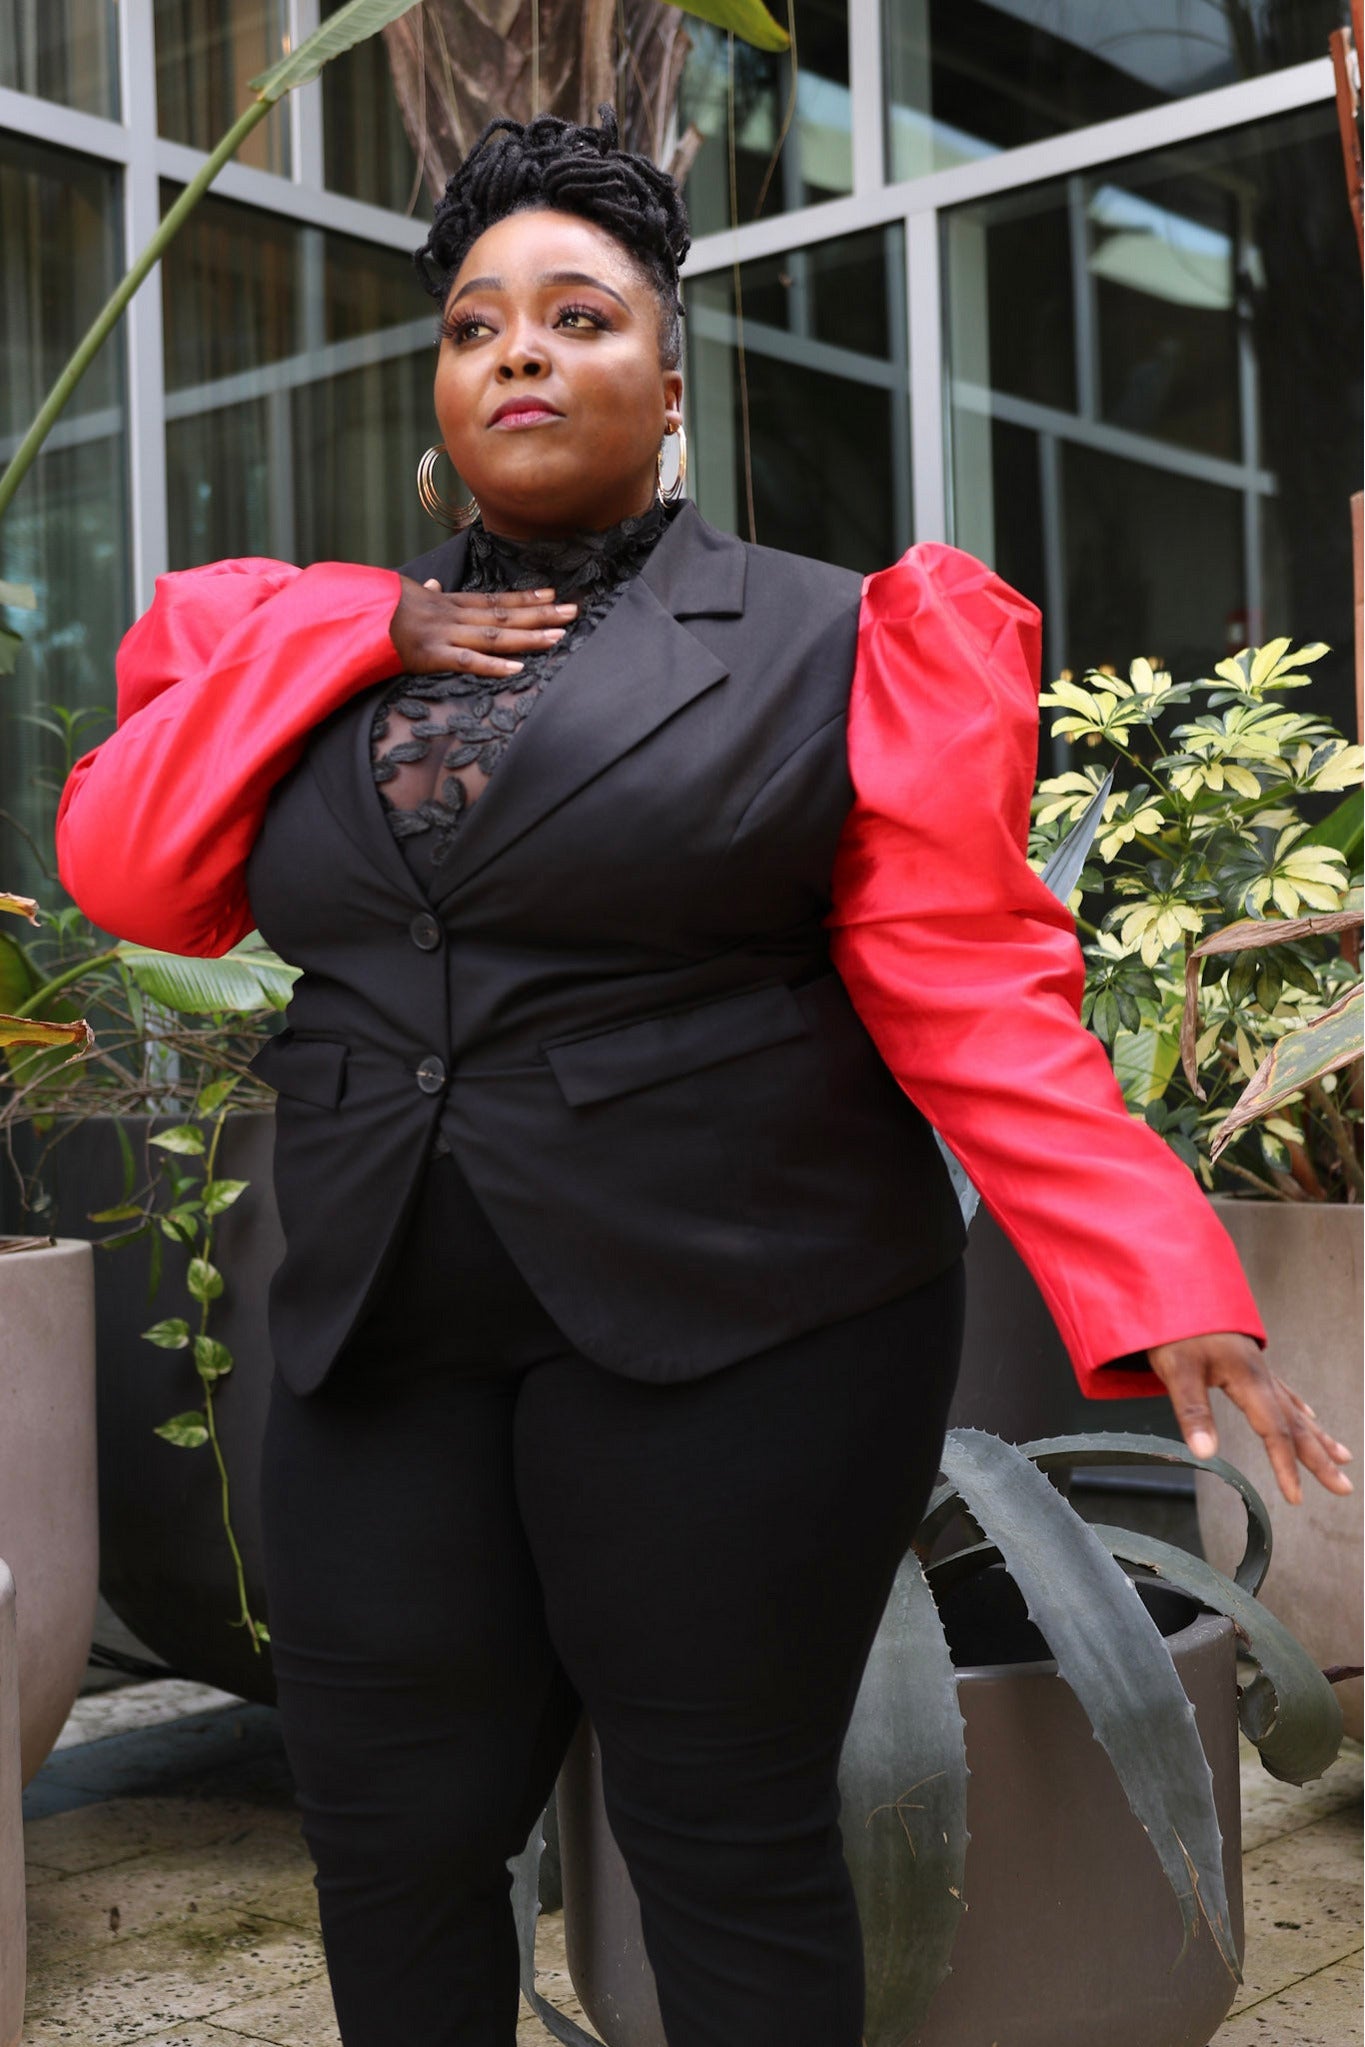 TUXEDO- PLUS BLACK JACKET WITH RED PUFFY SLEEVES